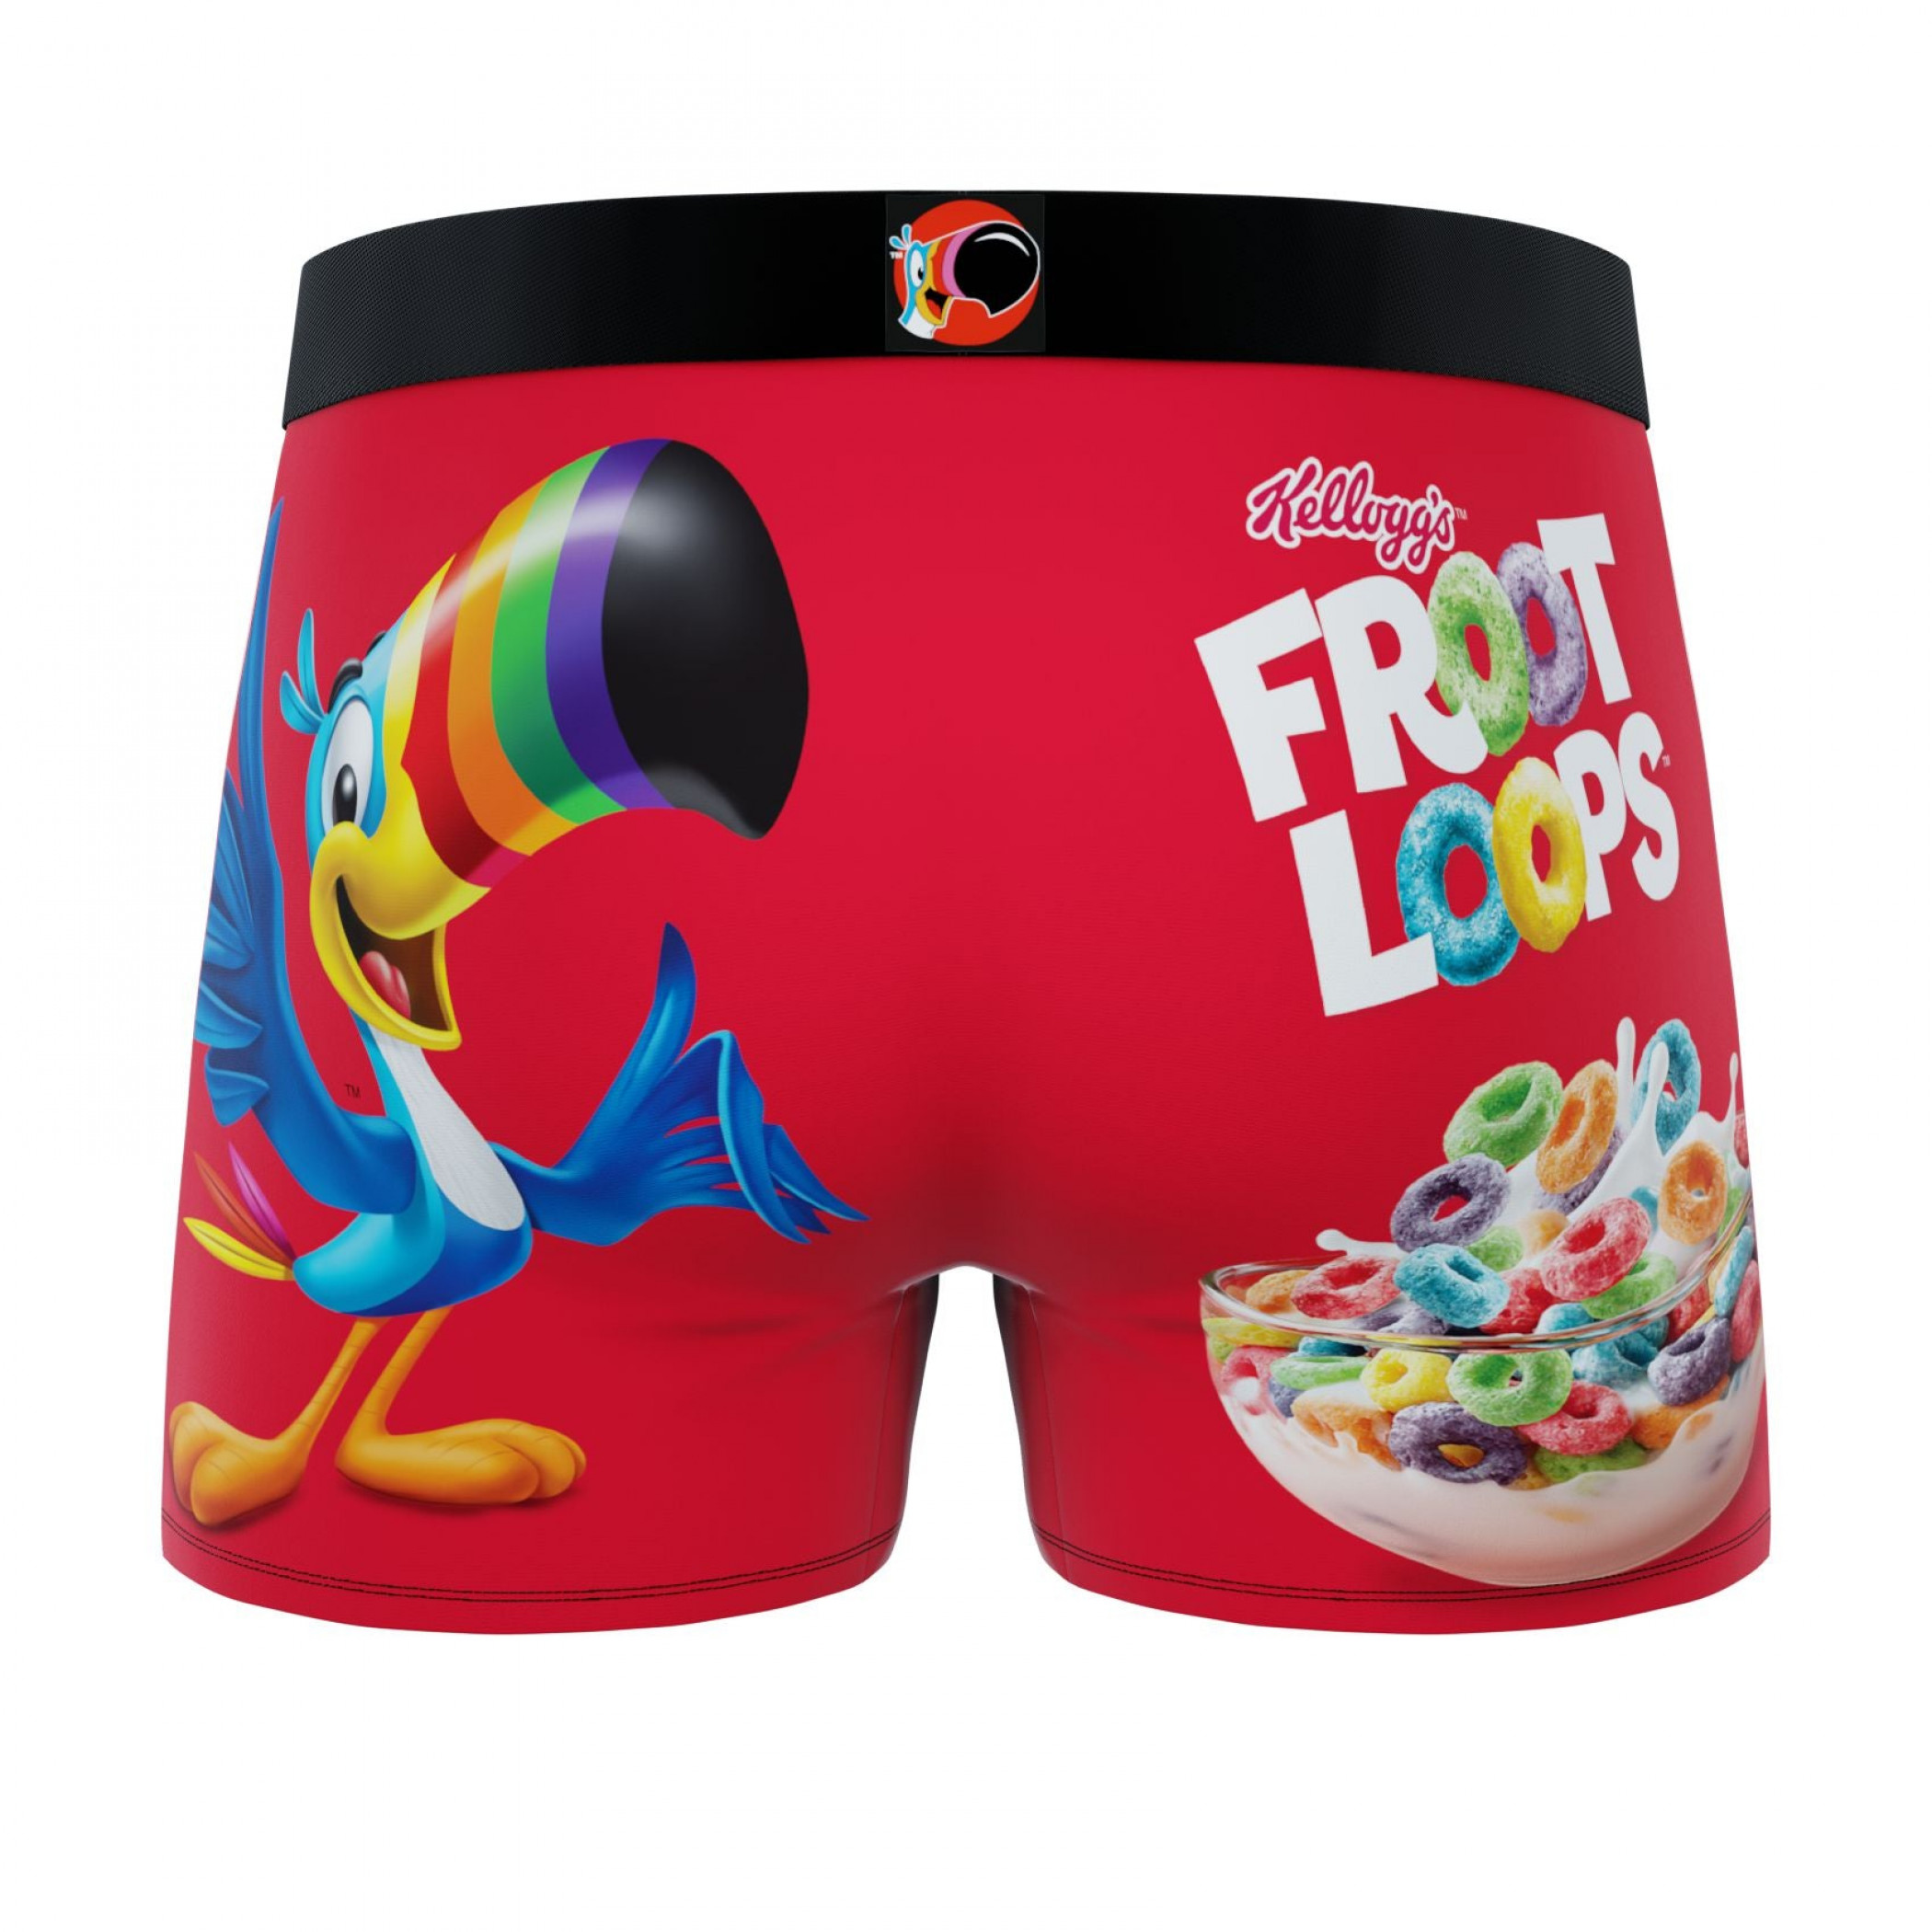 Slips boxer homme Crazy Boxer Kellogg's Froot Loops rouge